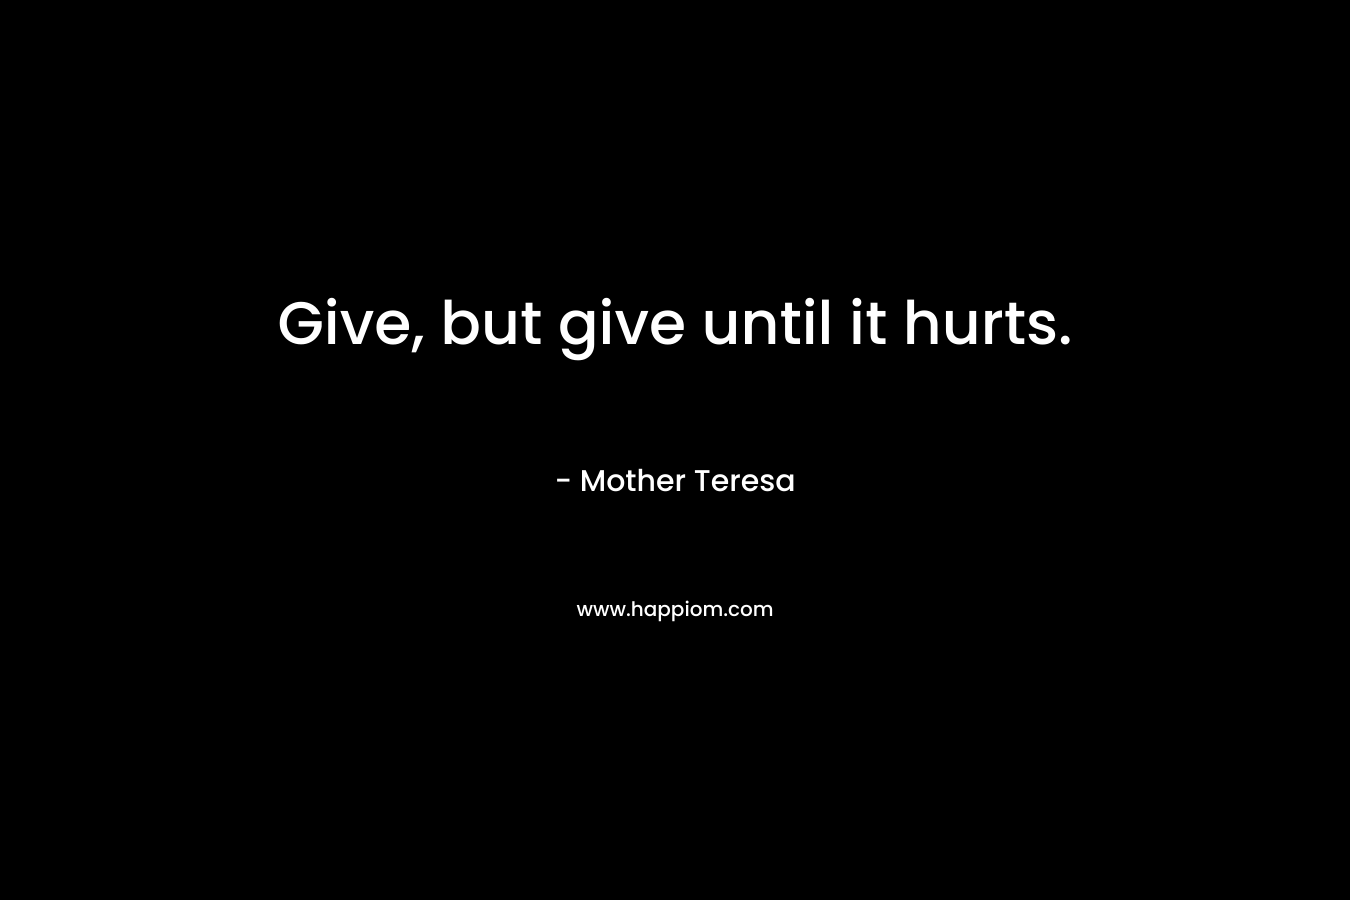 Give, but give until it hurts. – Mother Teresa